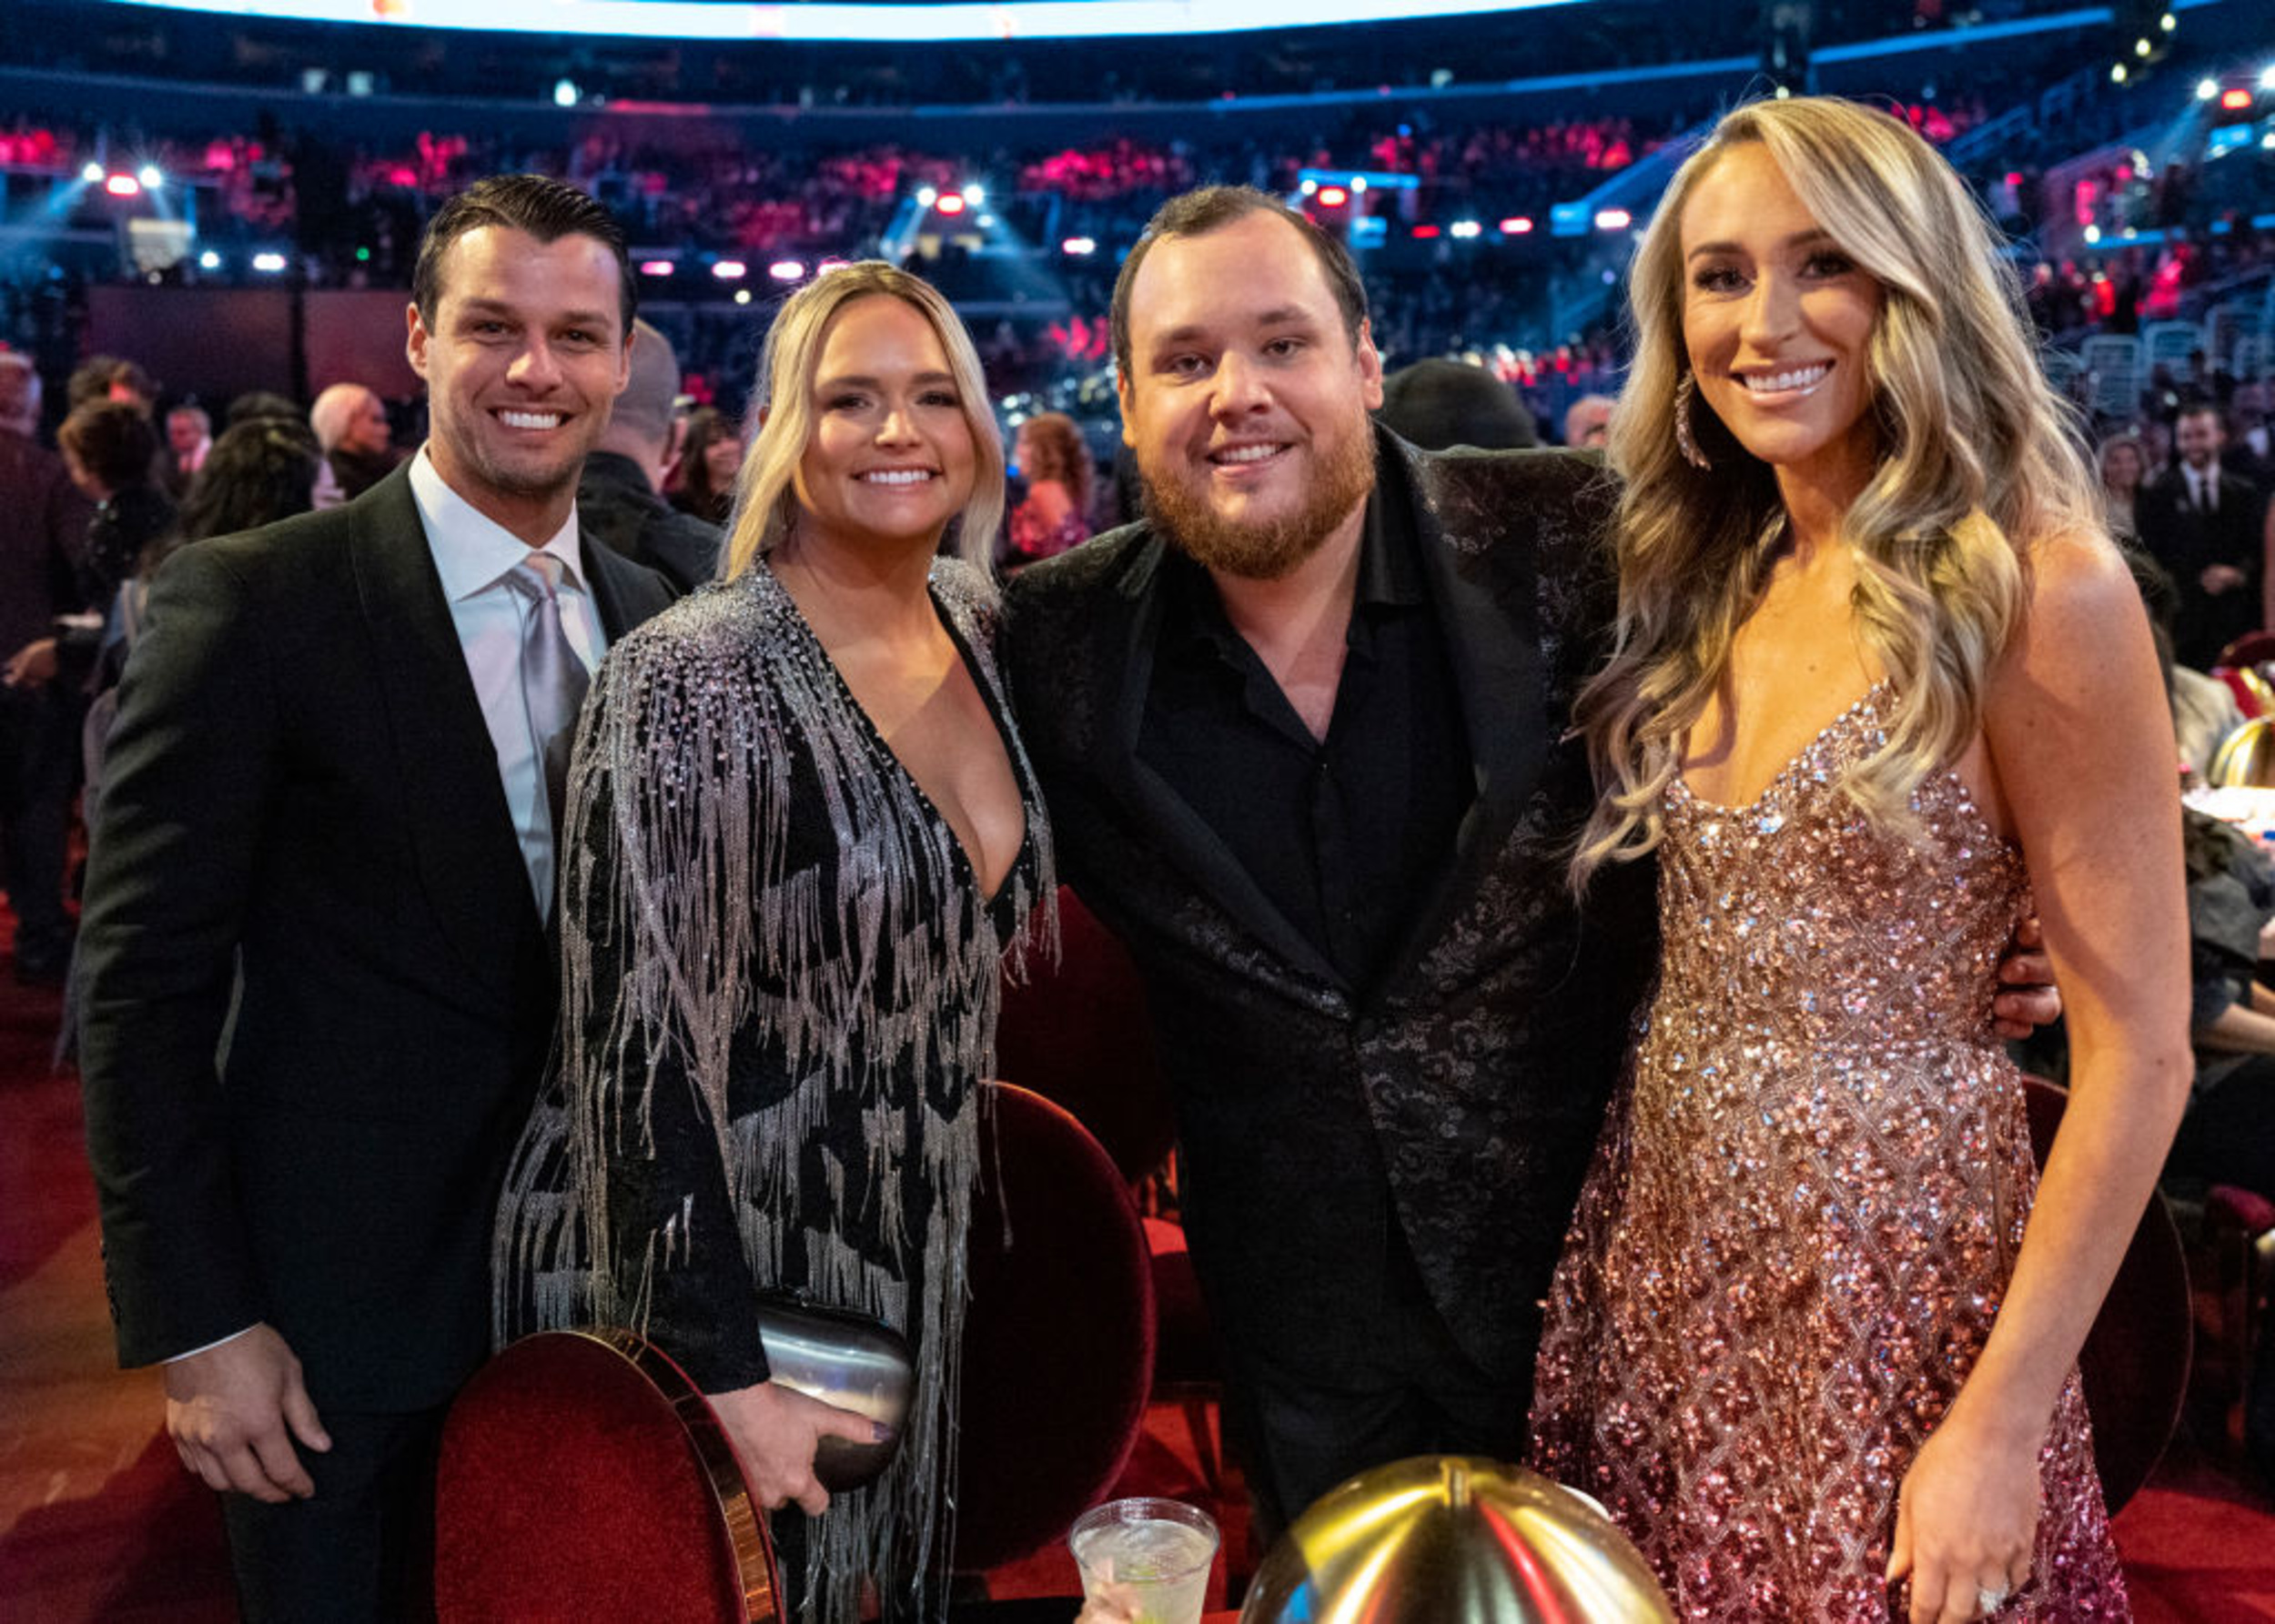 <p>Okay, sure, Miranda Lambert does appear alongside Luke Combs on "Outrunnin' Your Memory," but many fans don't know that this duo of country superstars also wrote the song together. </p><p>You may also like: <a href='https://www.yardbarker.com/entertainment/articles/the_most_memorable_tv_shows_set_in_dystopian_worlds/s1__35858798'>The most memorable TV shows set in dystopian worlds</a></p>